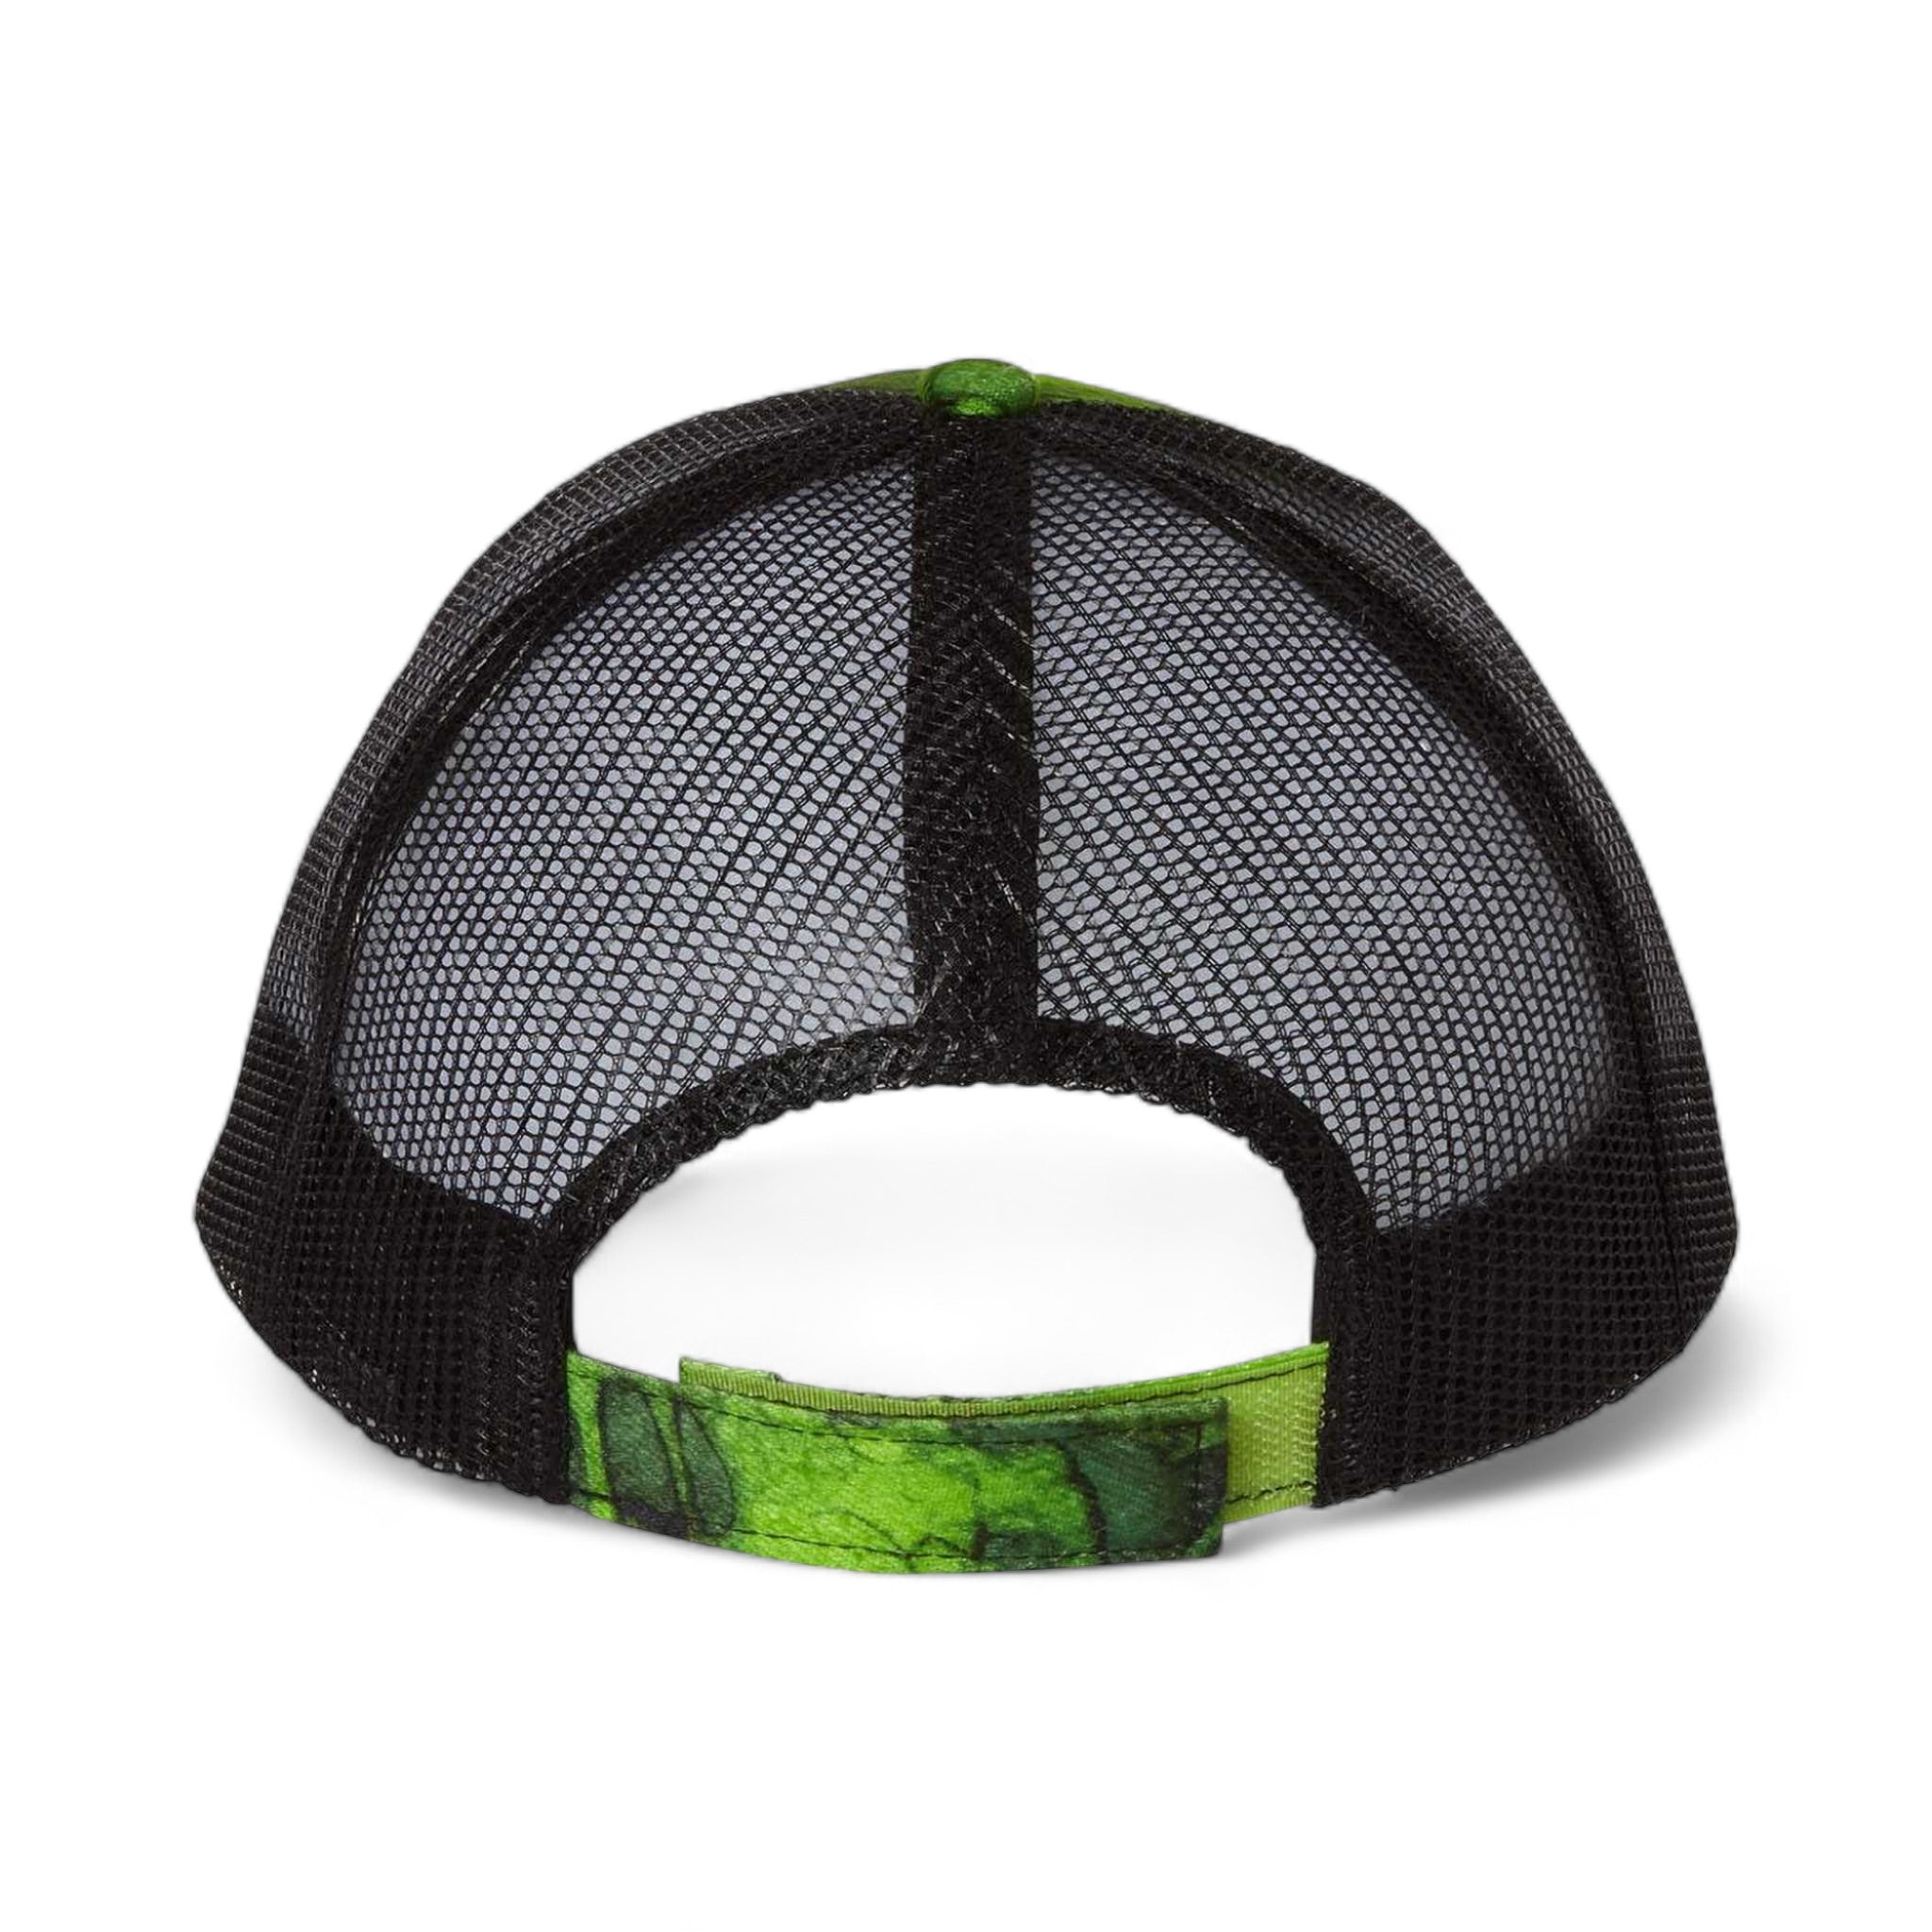 Back view of Kati LC5M custom hat in prym1 amped green and black